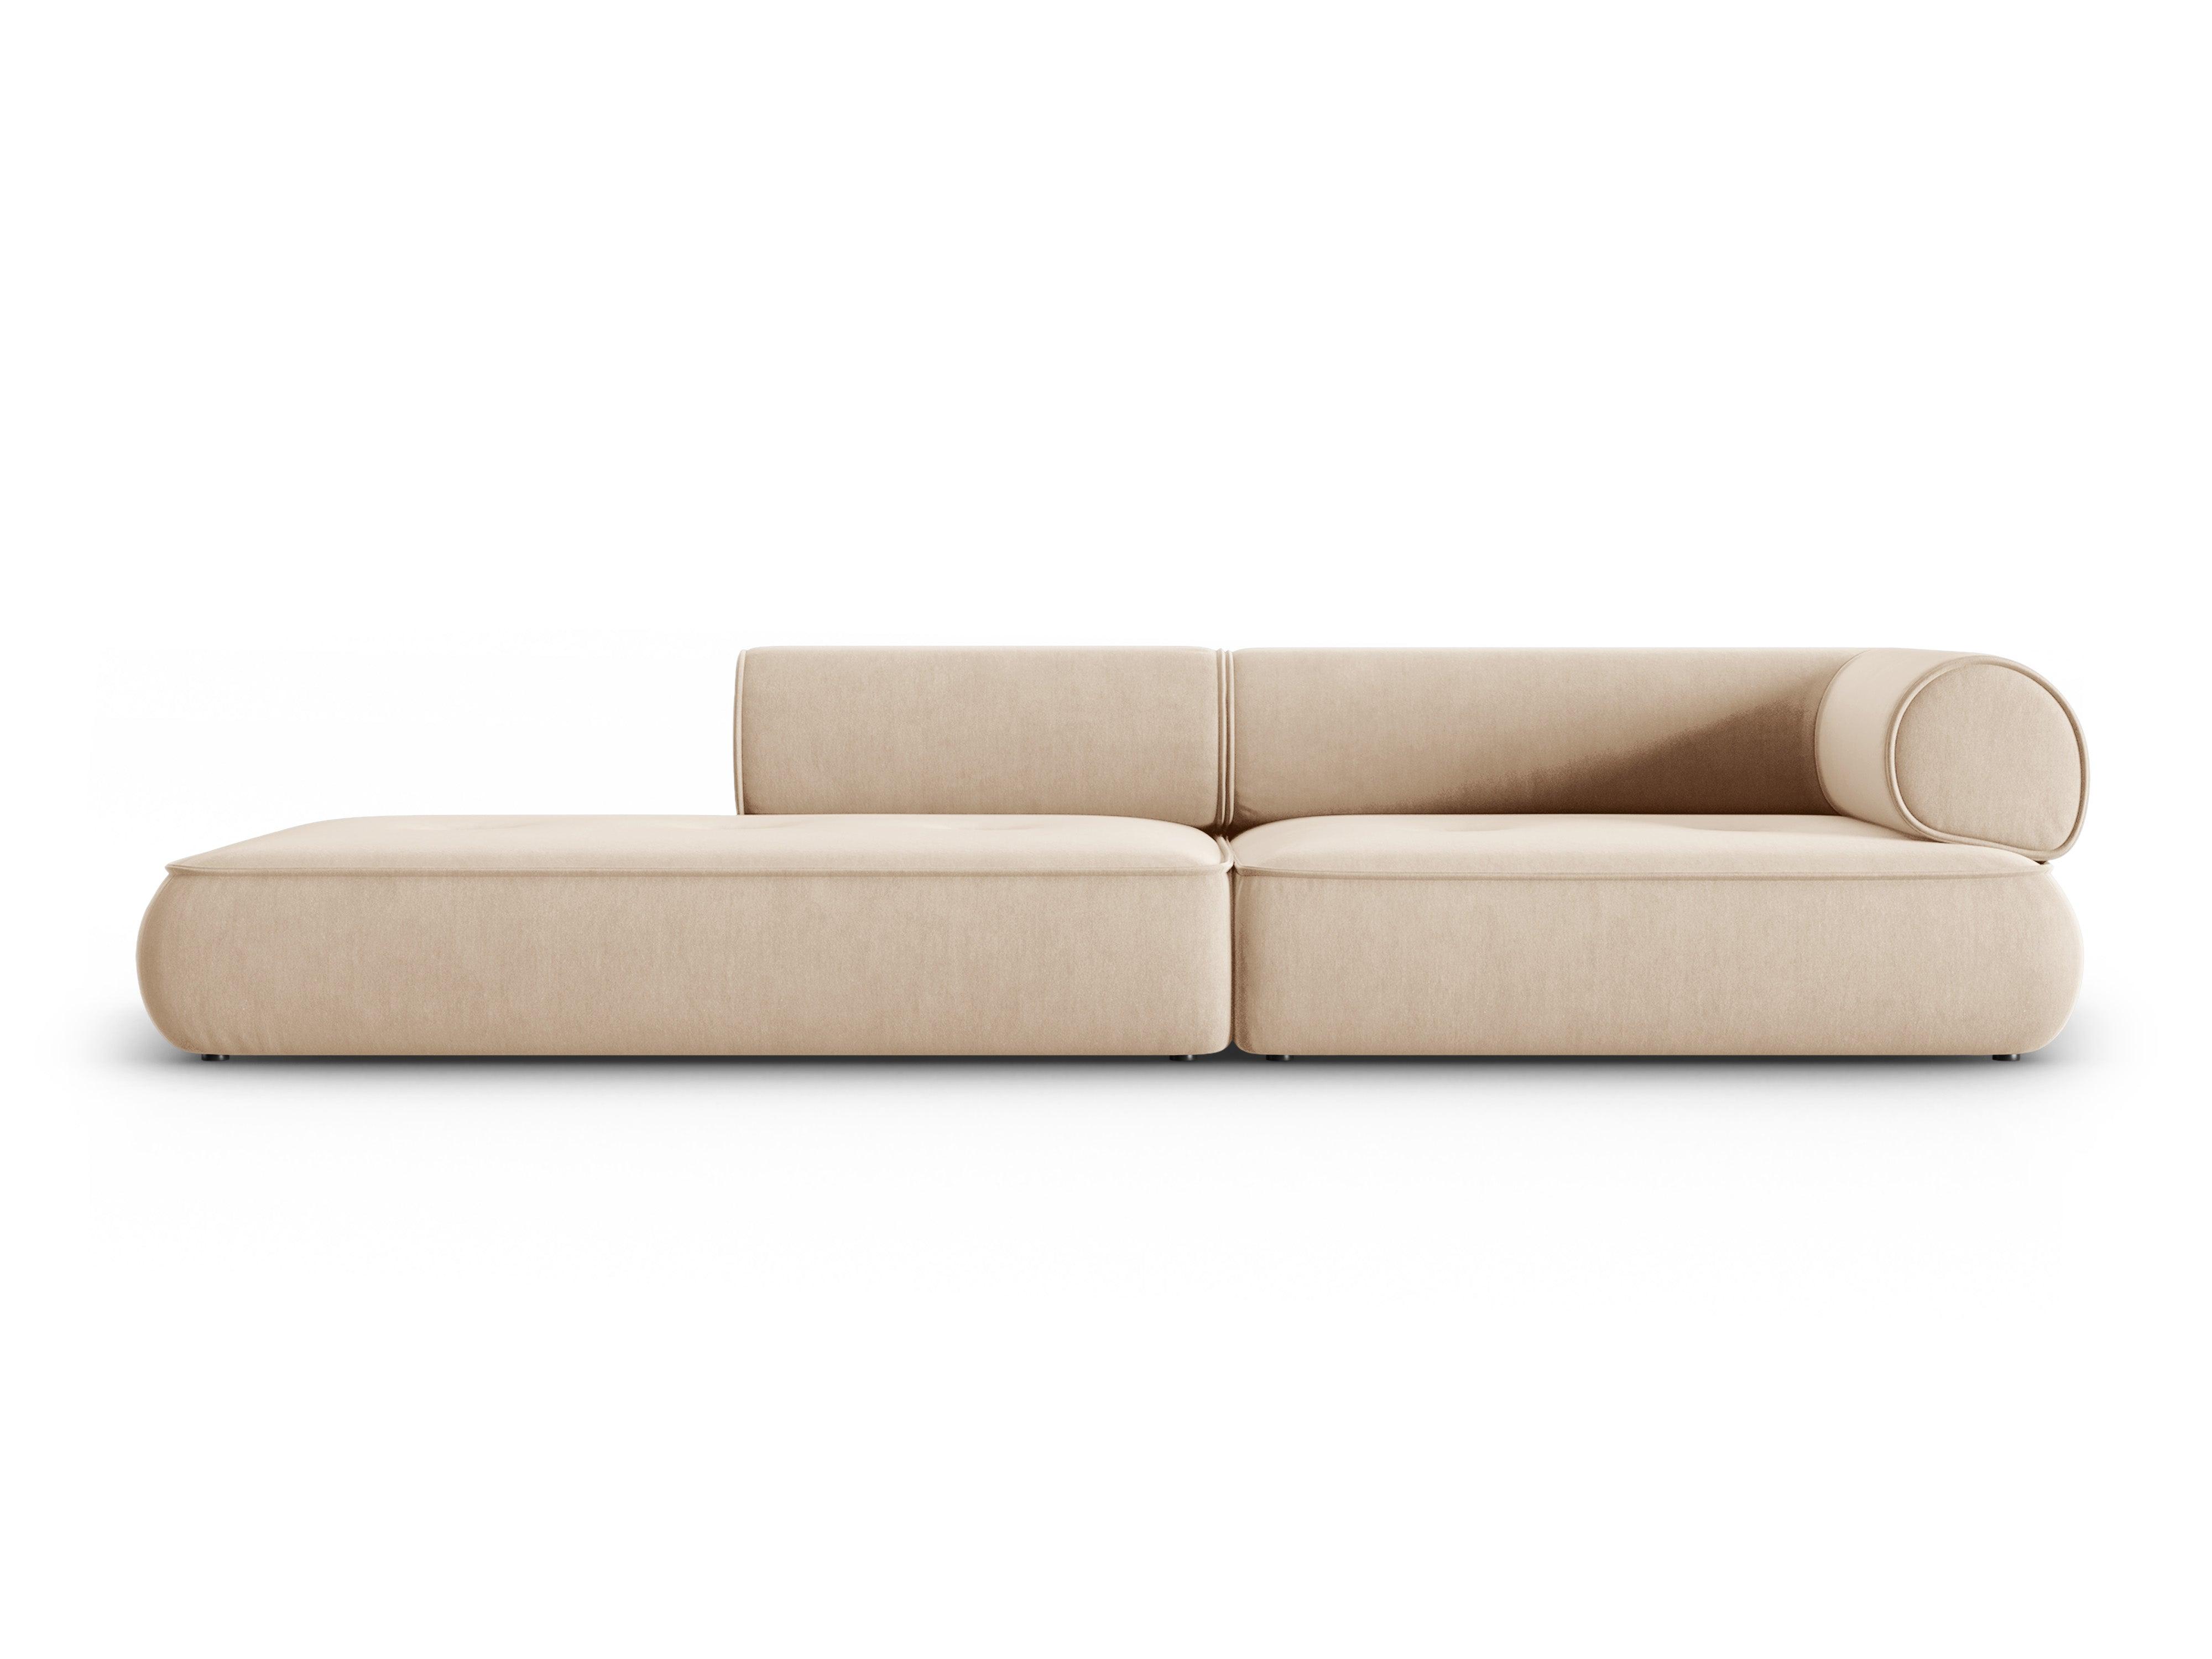 Modular Left Open Sofa, "Lily", 4 Seats, 292x105x74
 Made in Europe, Maison Heritage, Eye on Design